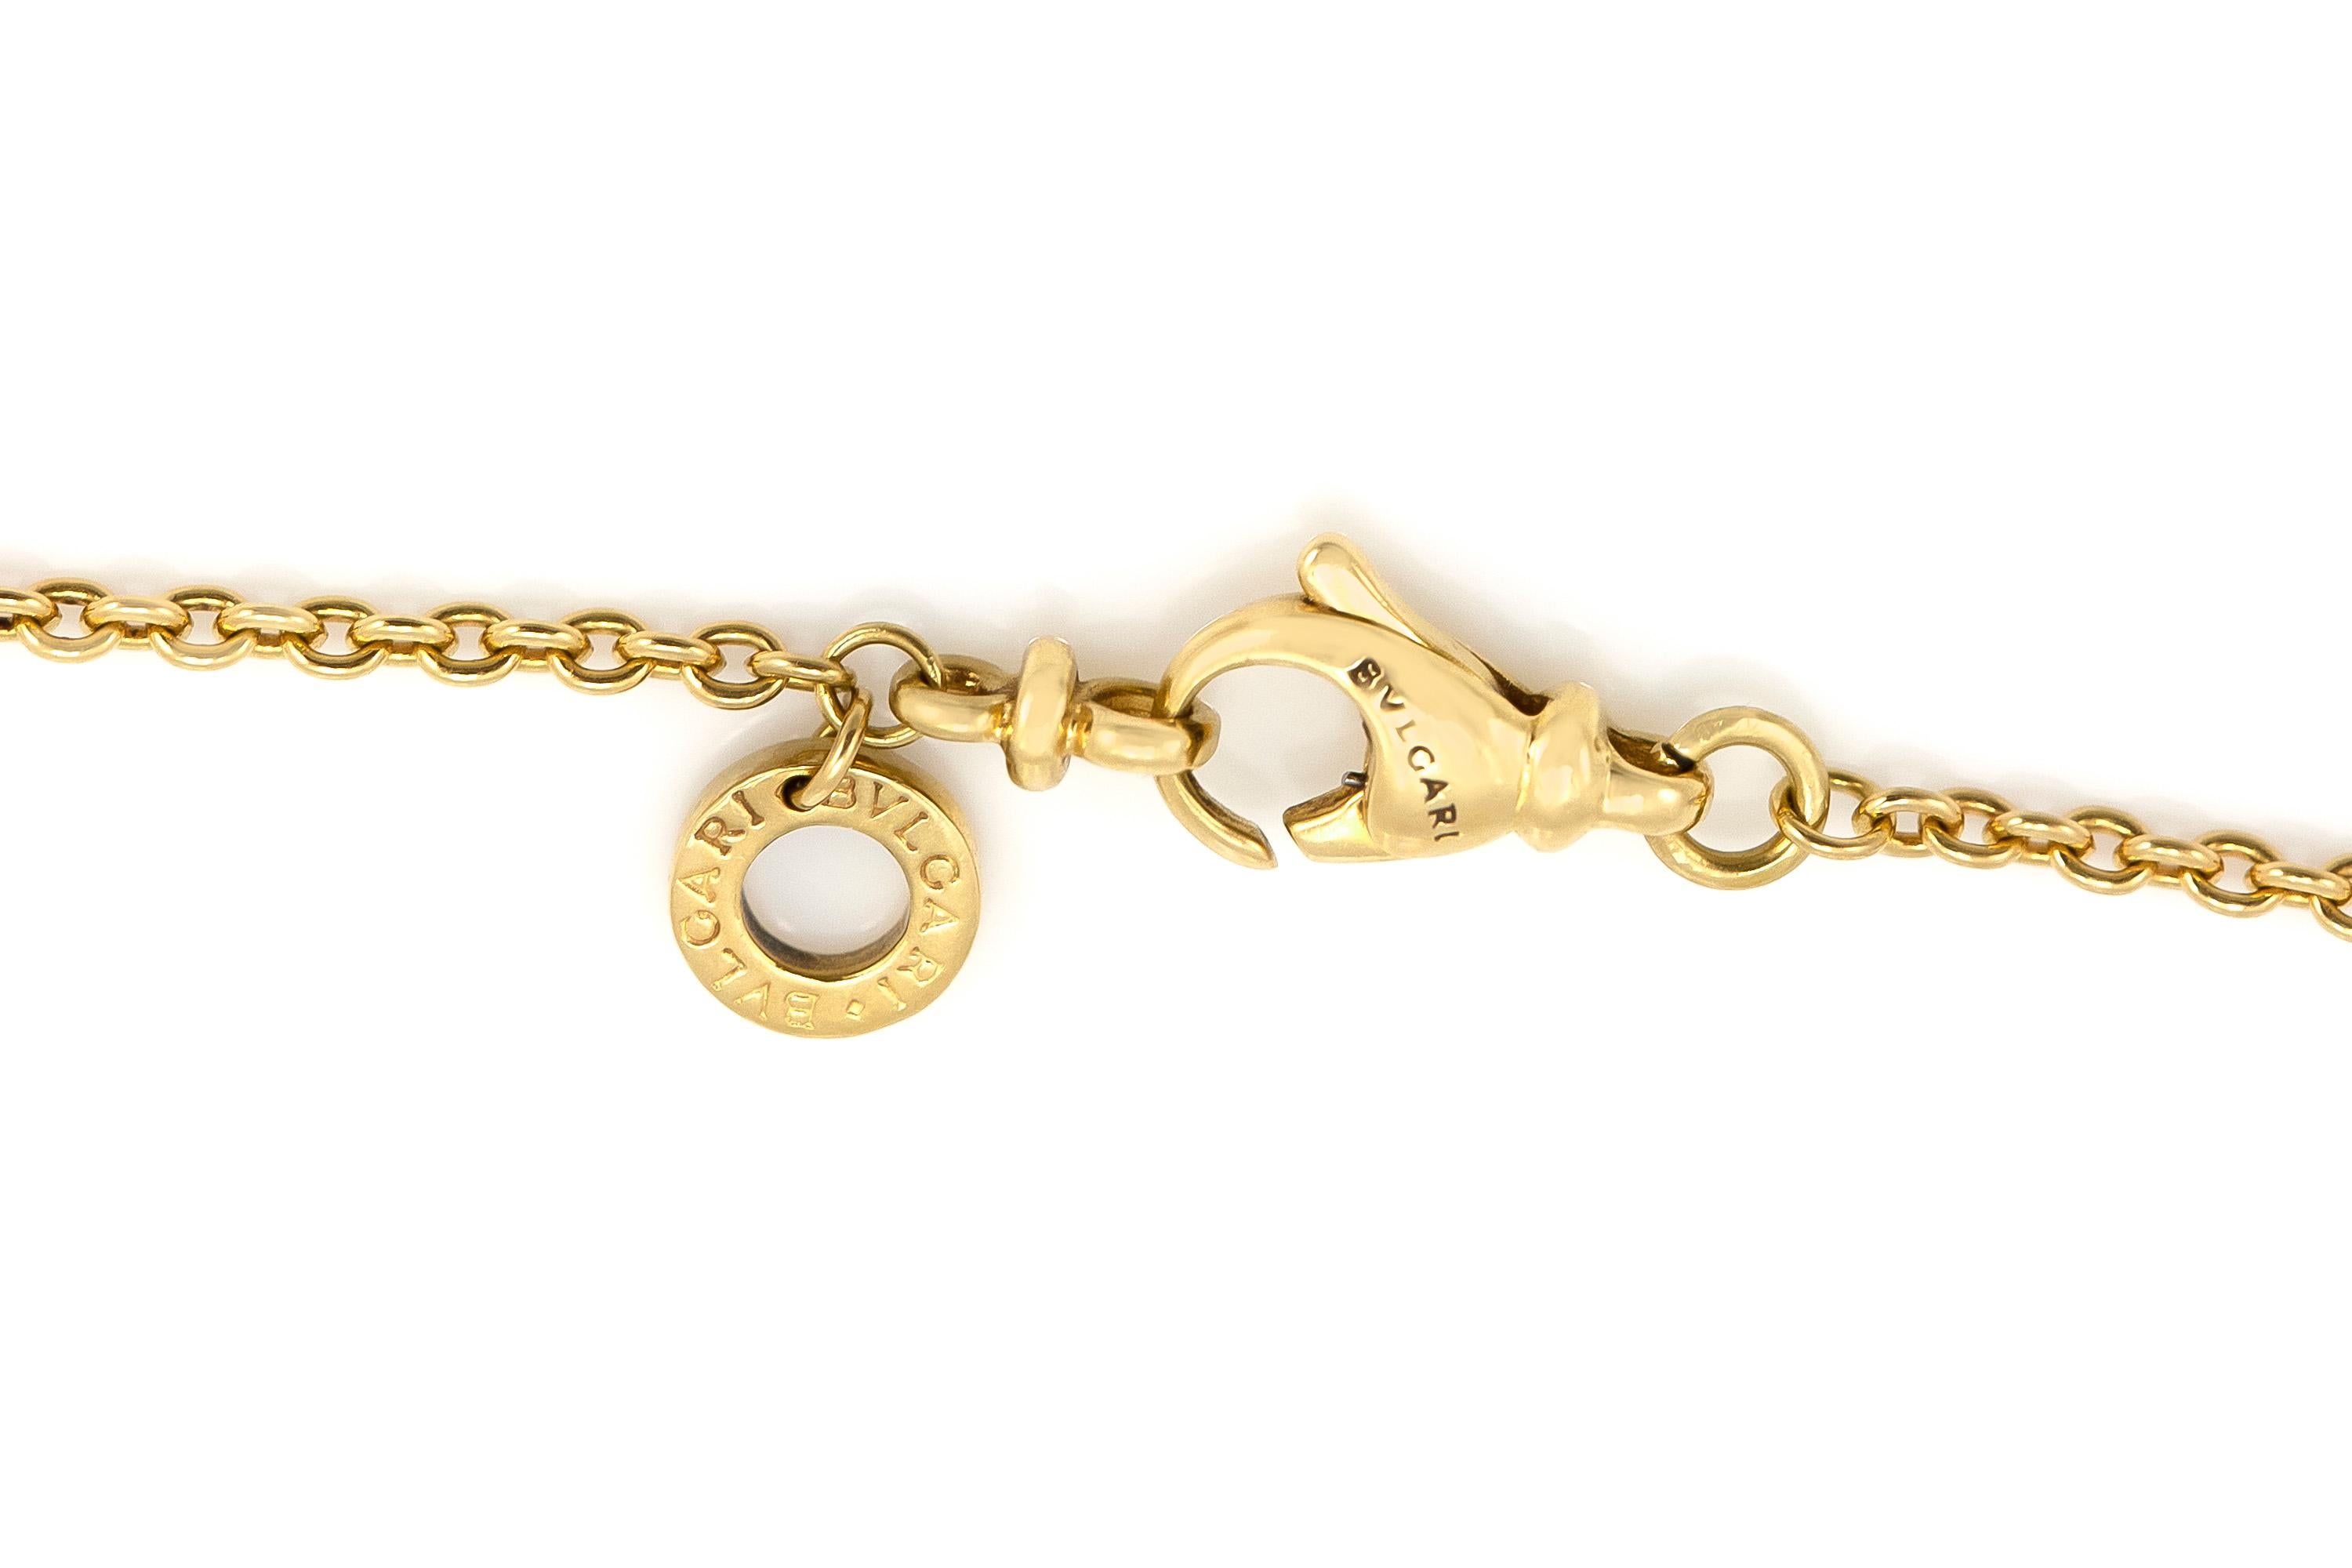 The necklace is finel ycrafted in 18k yellow gold with diamonds pendant.
SIgned by Bvlgari.